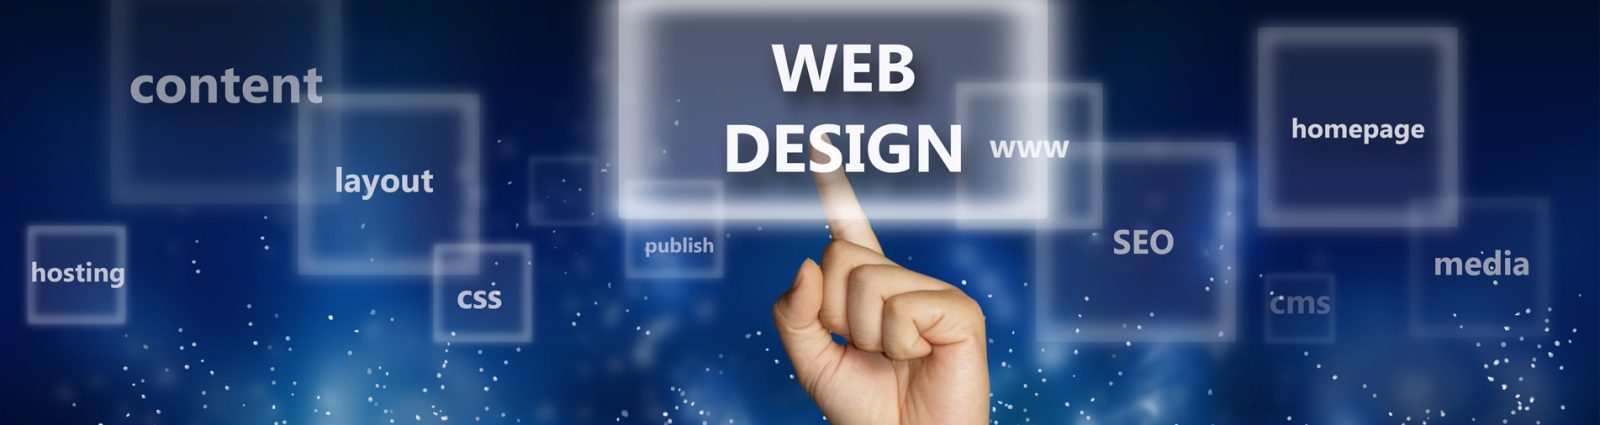 Key Web Design Tips to Attract Potential Customers